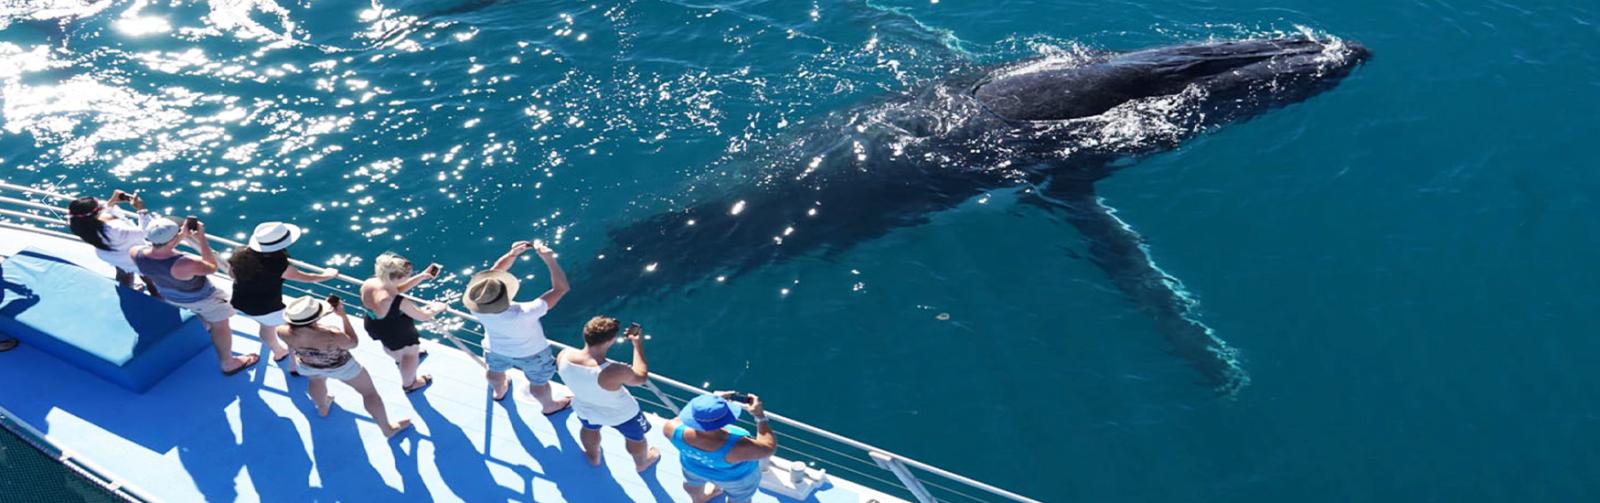 Broome Whale Watching tours are a great activity for winter